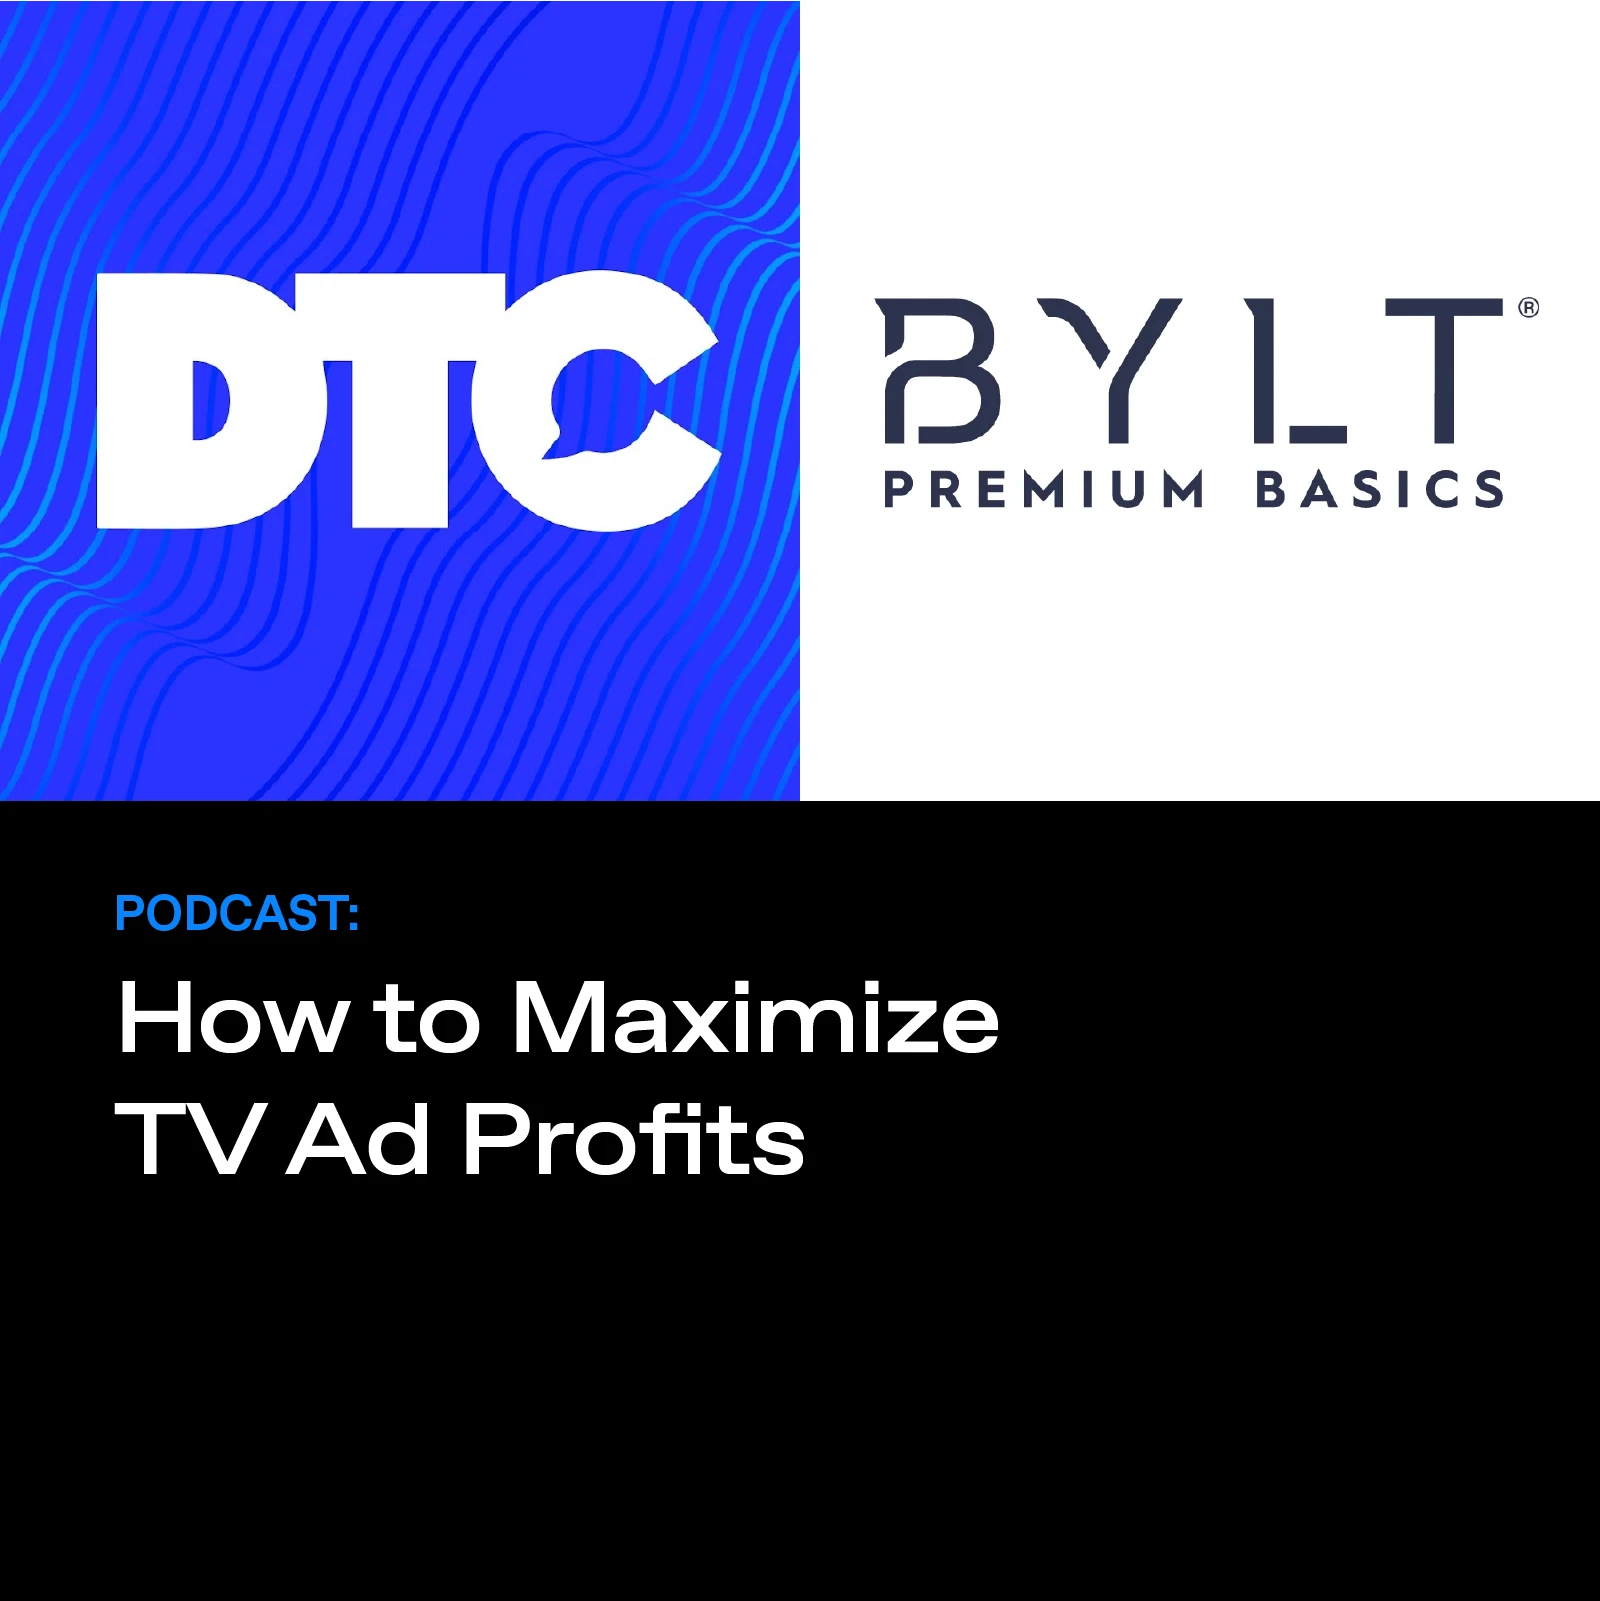 How to Maximize TV Ad Profits with BYLT's Spencer Toomey and Greg Kalin of Tatari